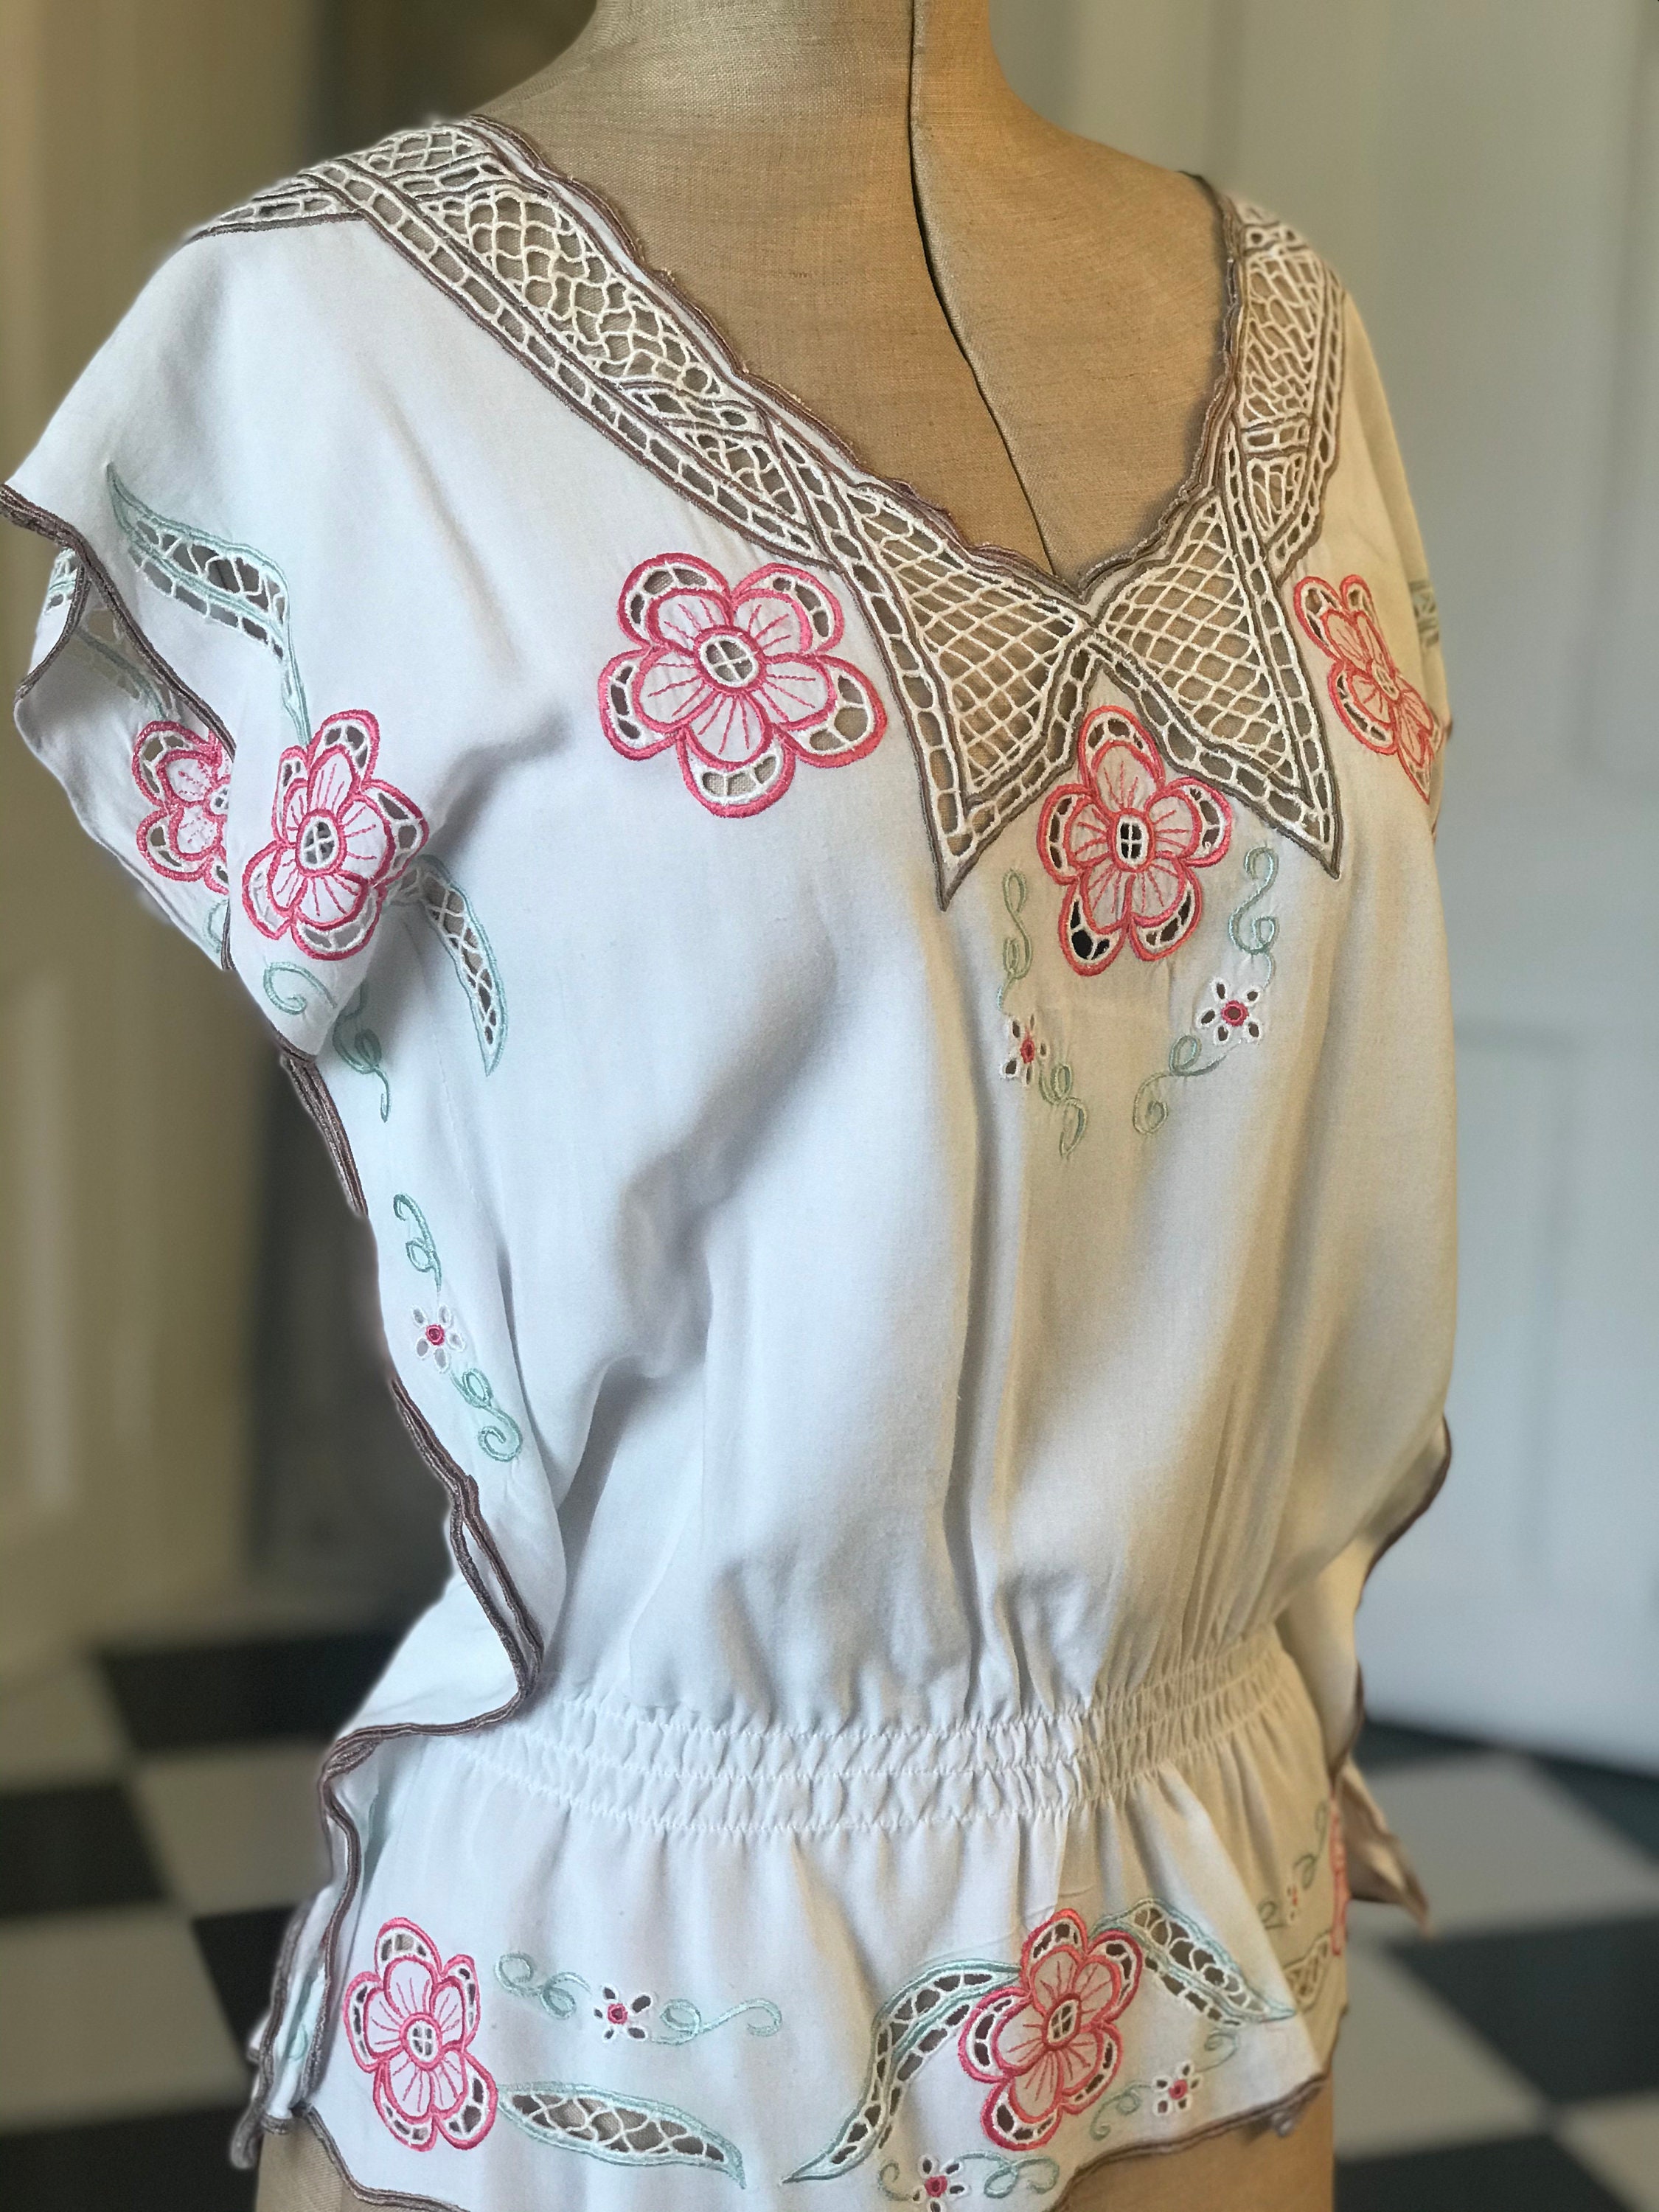 70s 80s Vintage Summer Blouse Embroidered in Pinks and Greens | Etsy UK